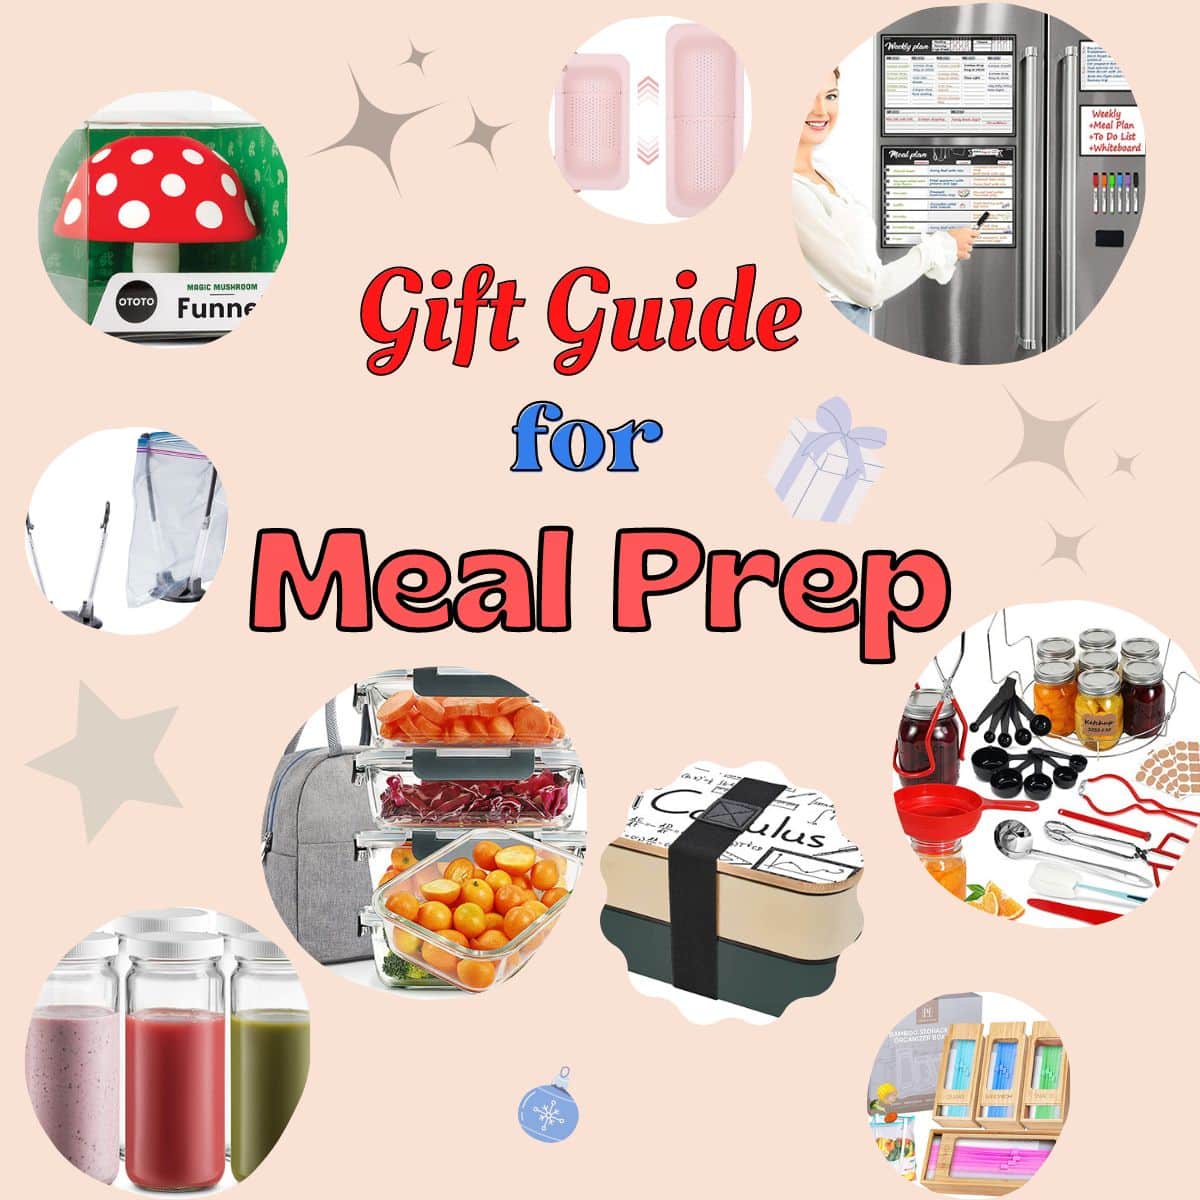 https://www.healingtomato.com/wp-content/uploads/2022/11/awesome-meal-prep-gift-guide.jpg